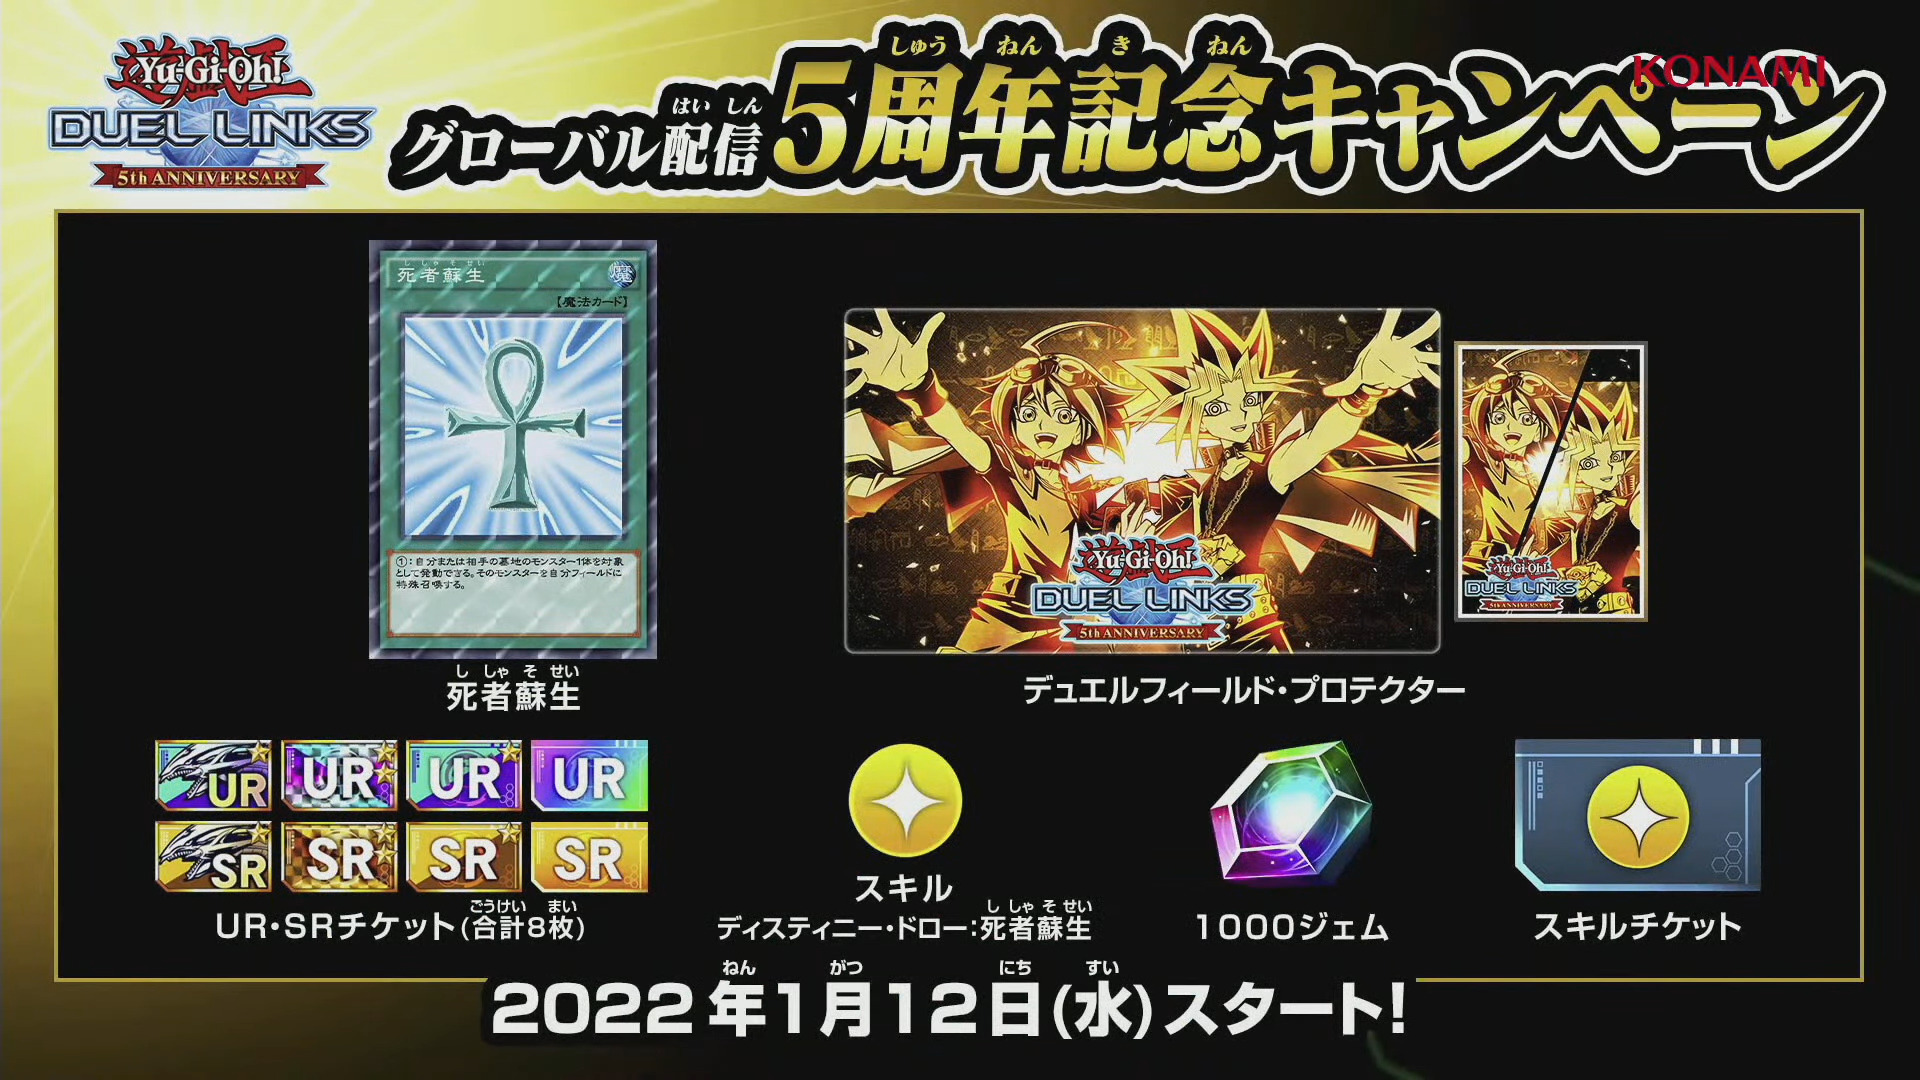 5th anniversary duel links